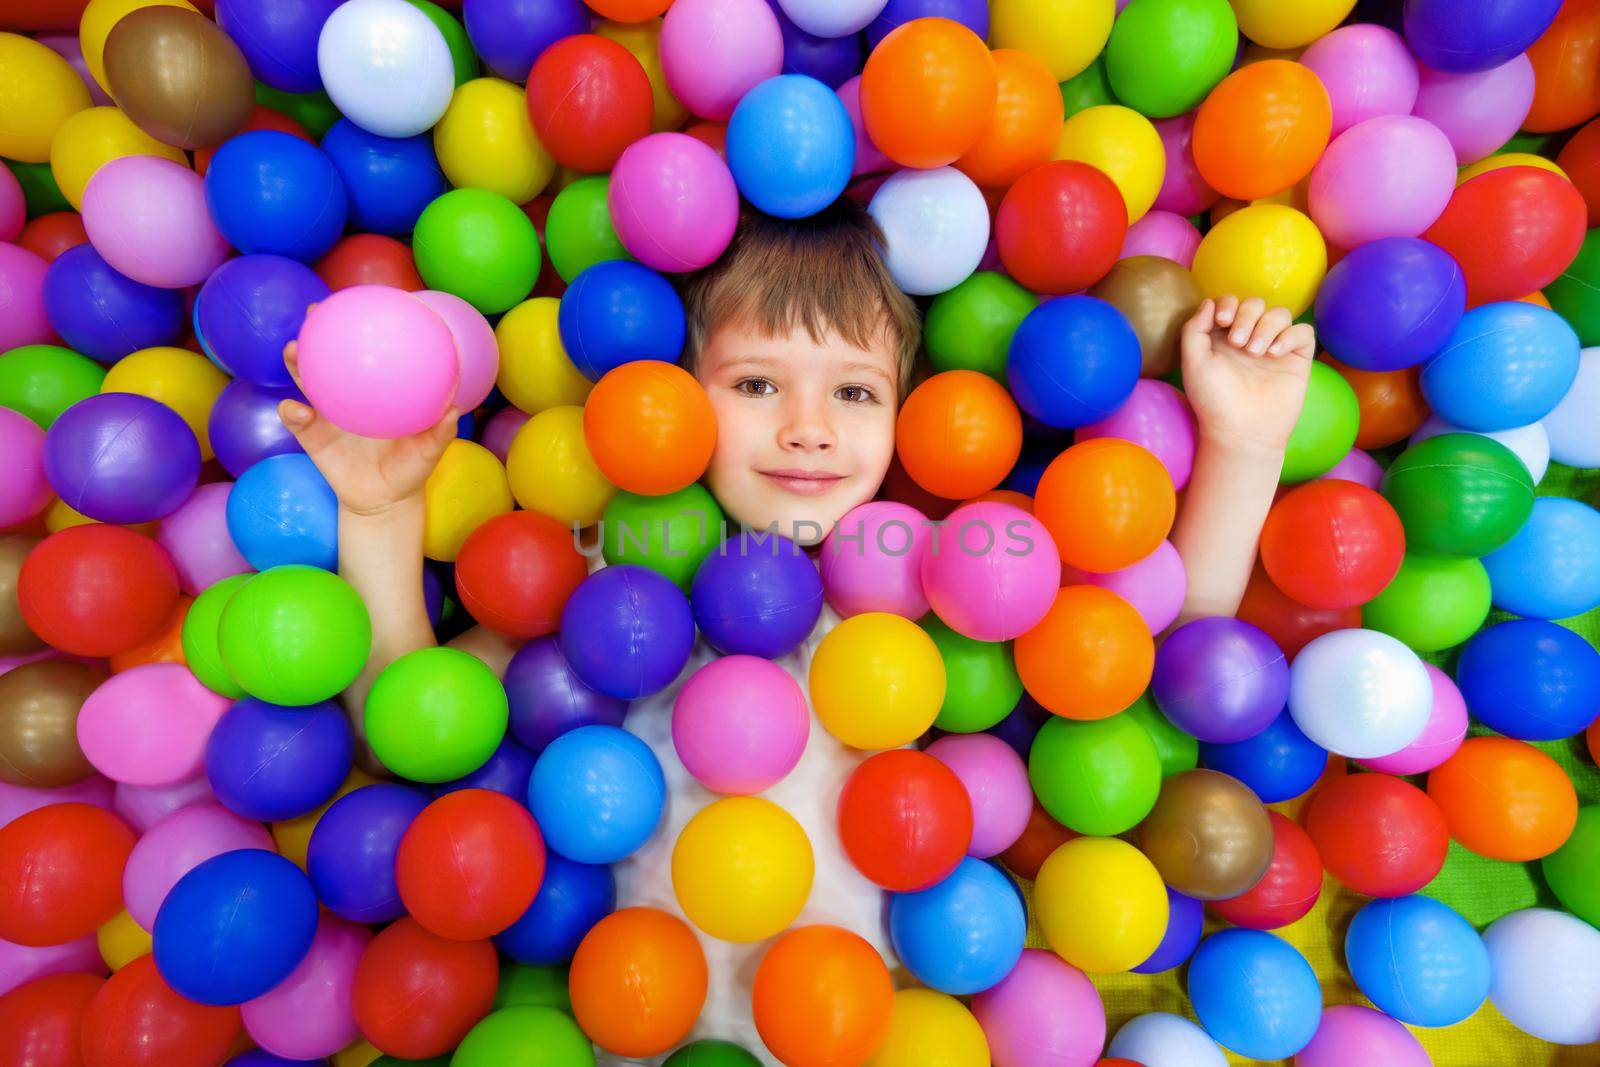 Smile kid lying colorful plastic balls pool. Colorful balls dry pool kindergarten playground child indoor play area. Playroom kids ball pit. Caucasian boy indoor playground kids play zone or kids zone